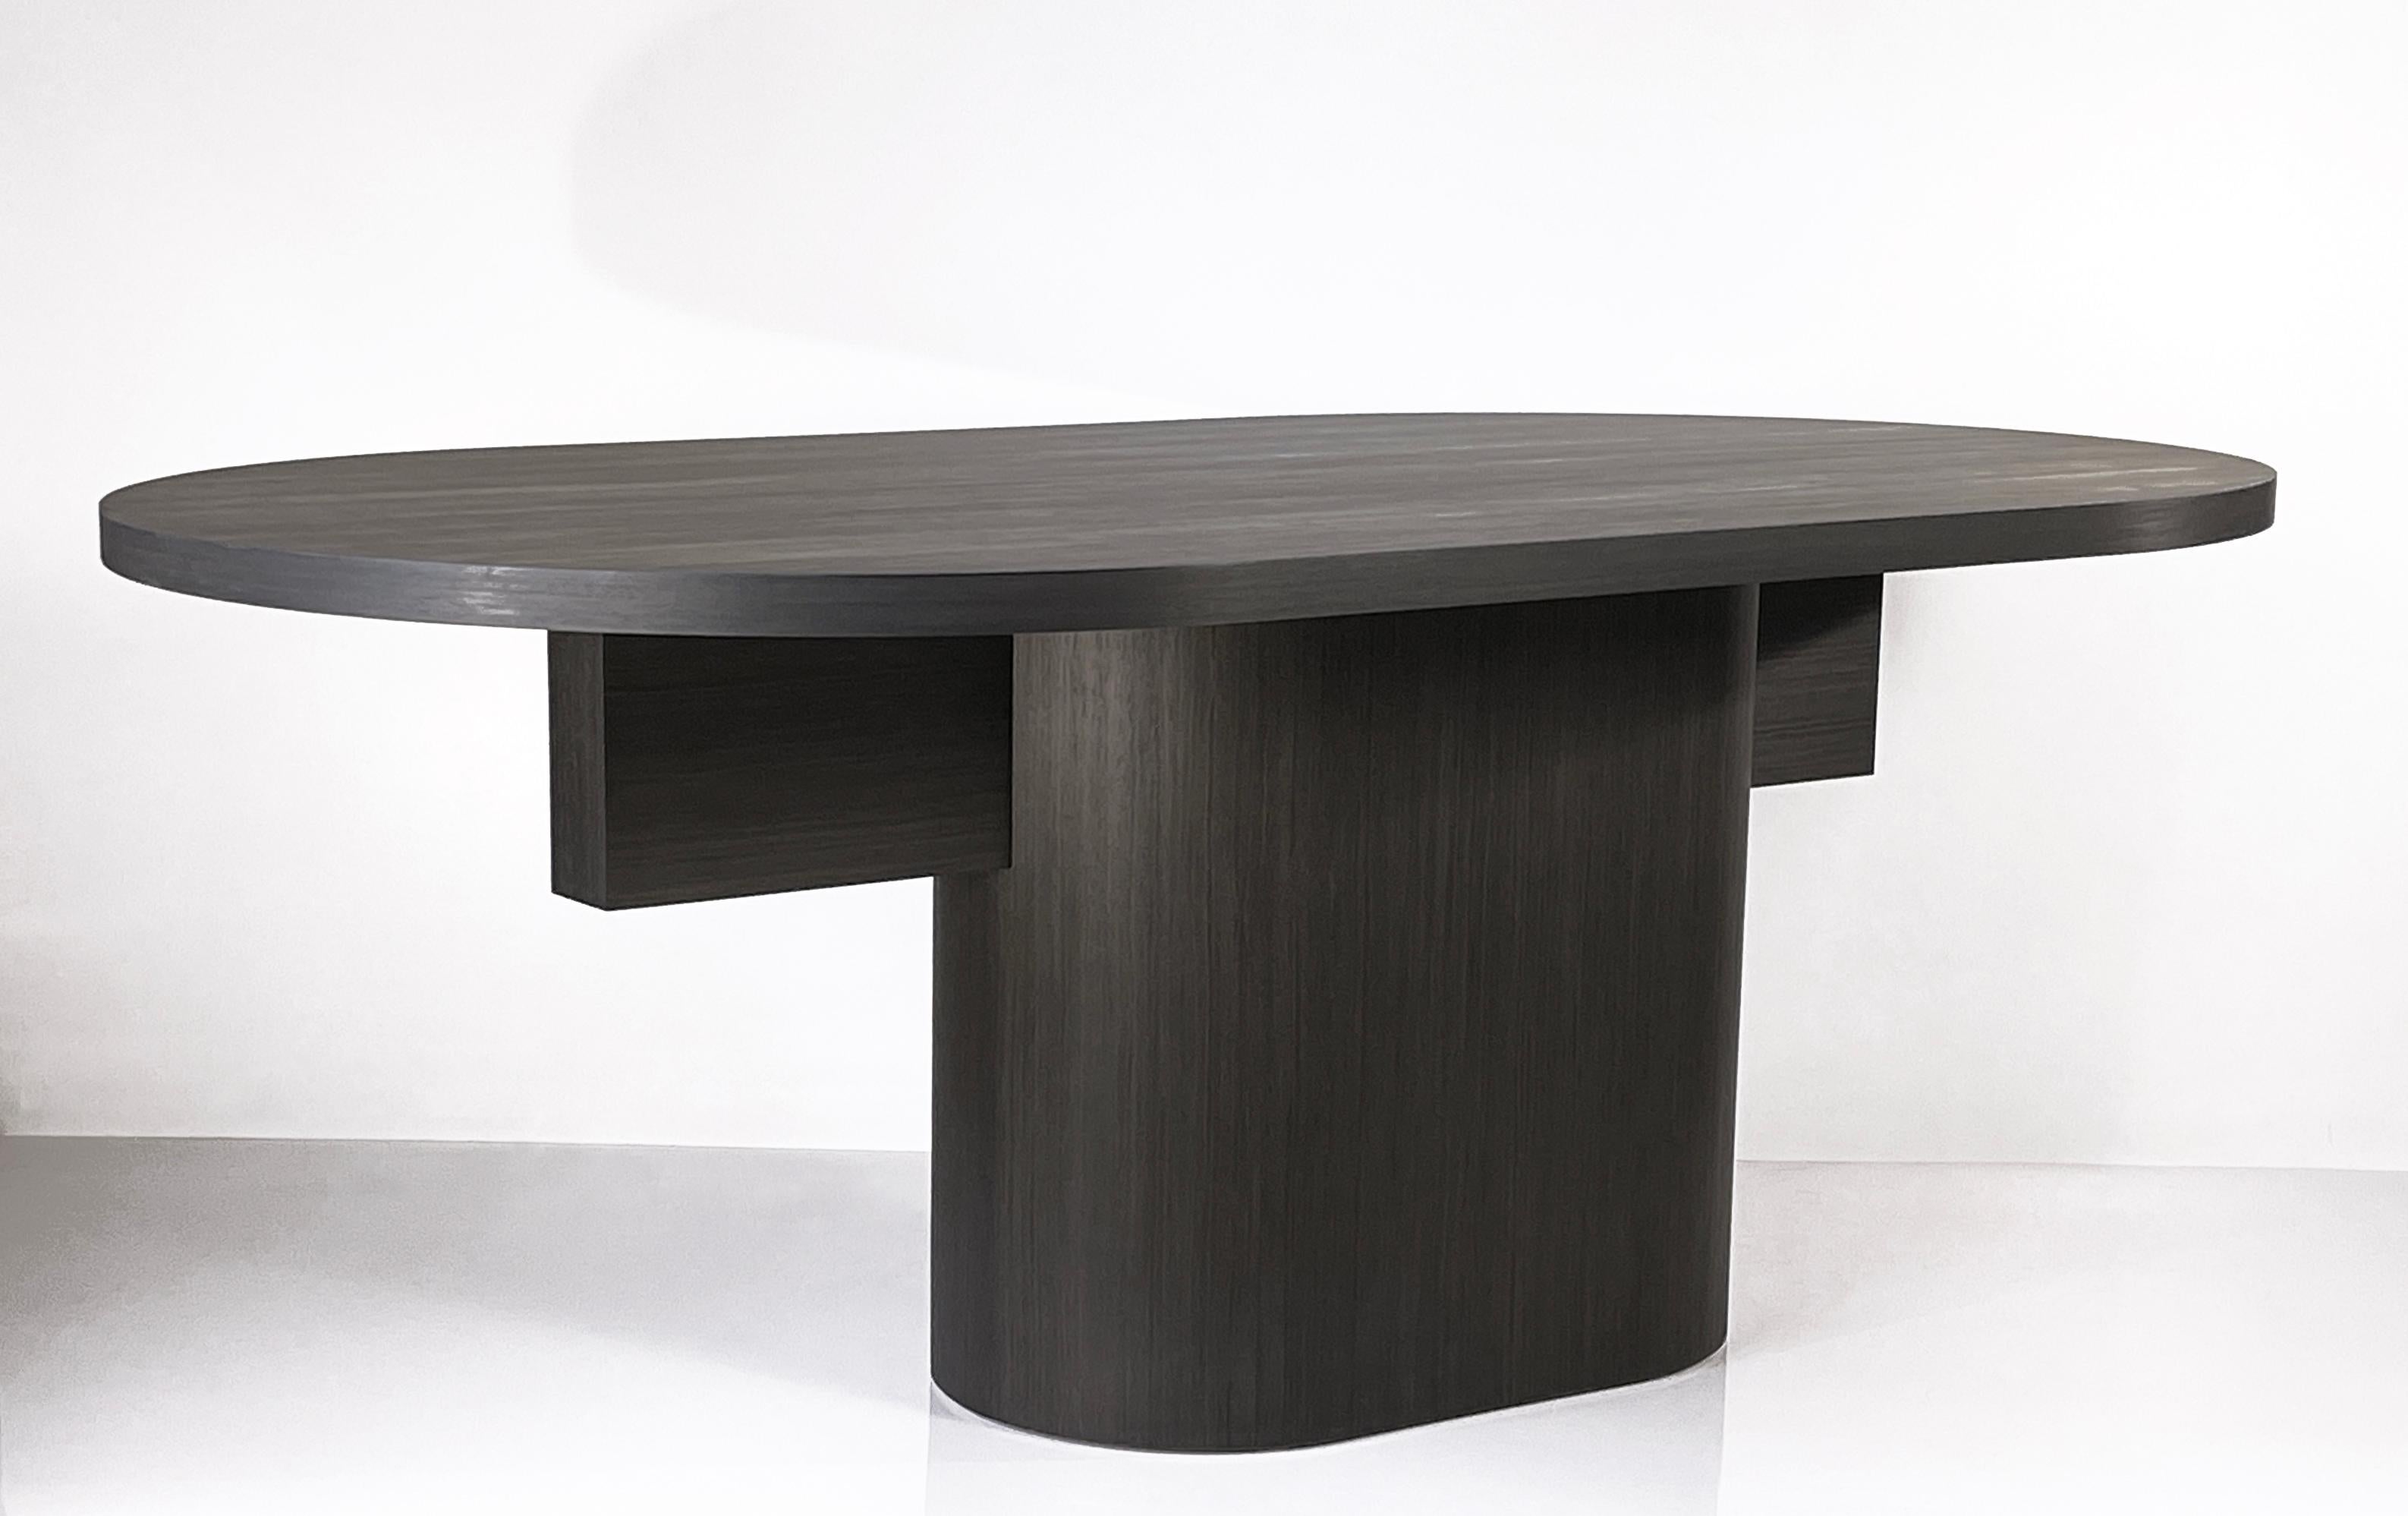 Minimalist Sebring, the Latest and Most Versatile Table from William Earle